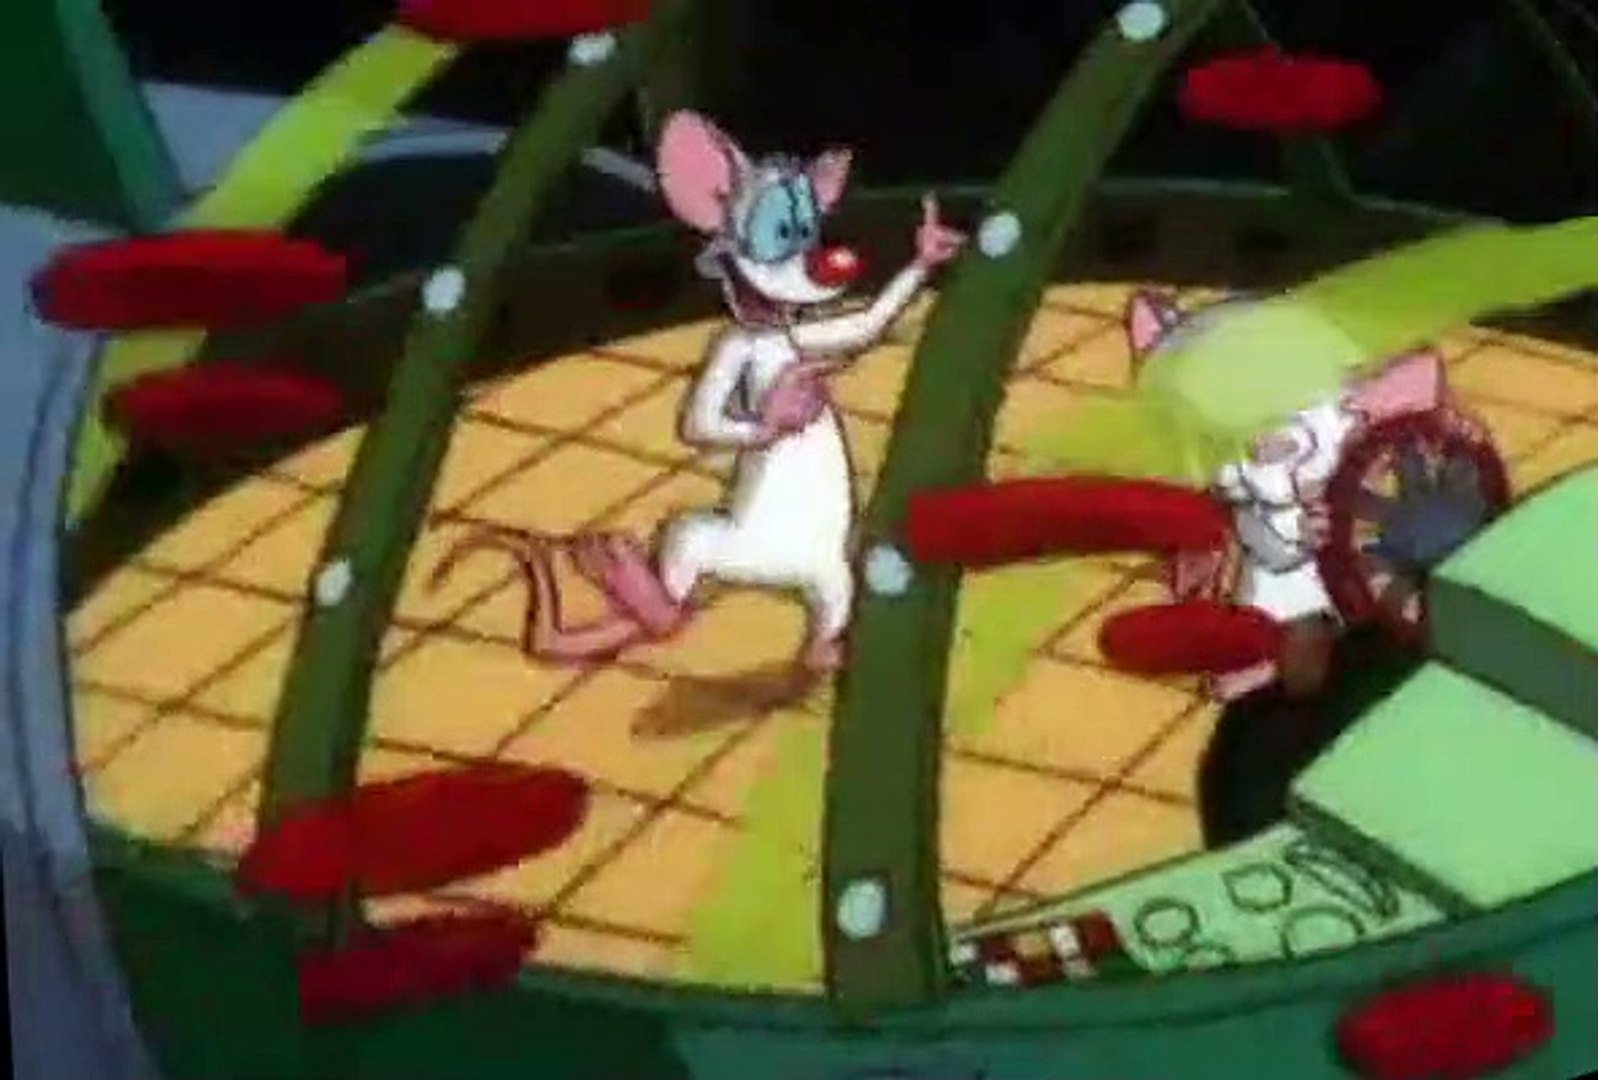 Pinky and the Brain Pinky and the Brain S01 E010 A Pinky and the Brain  Christmas - video Dailymotion